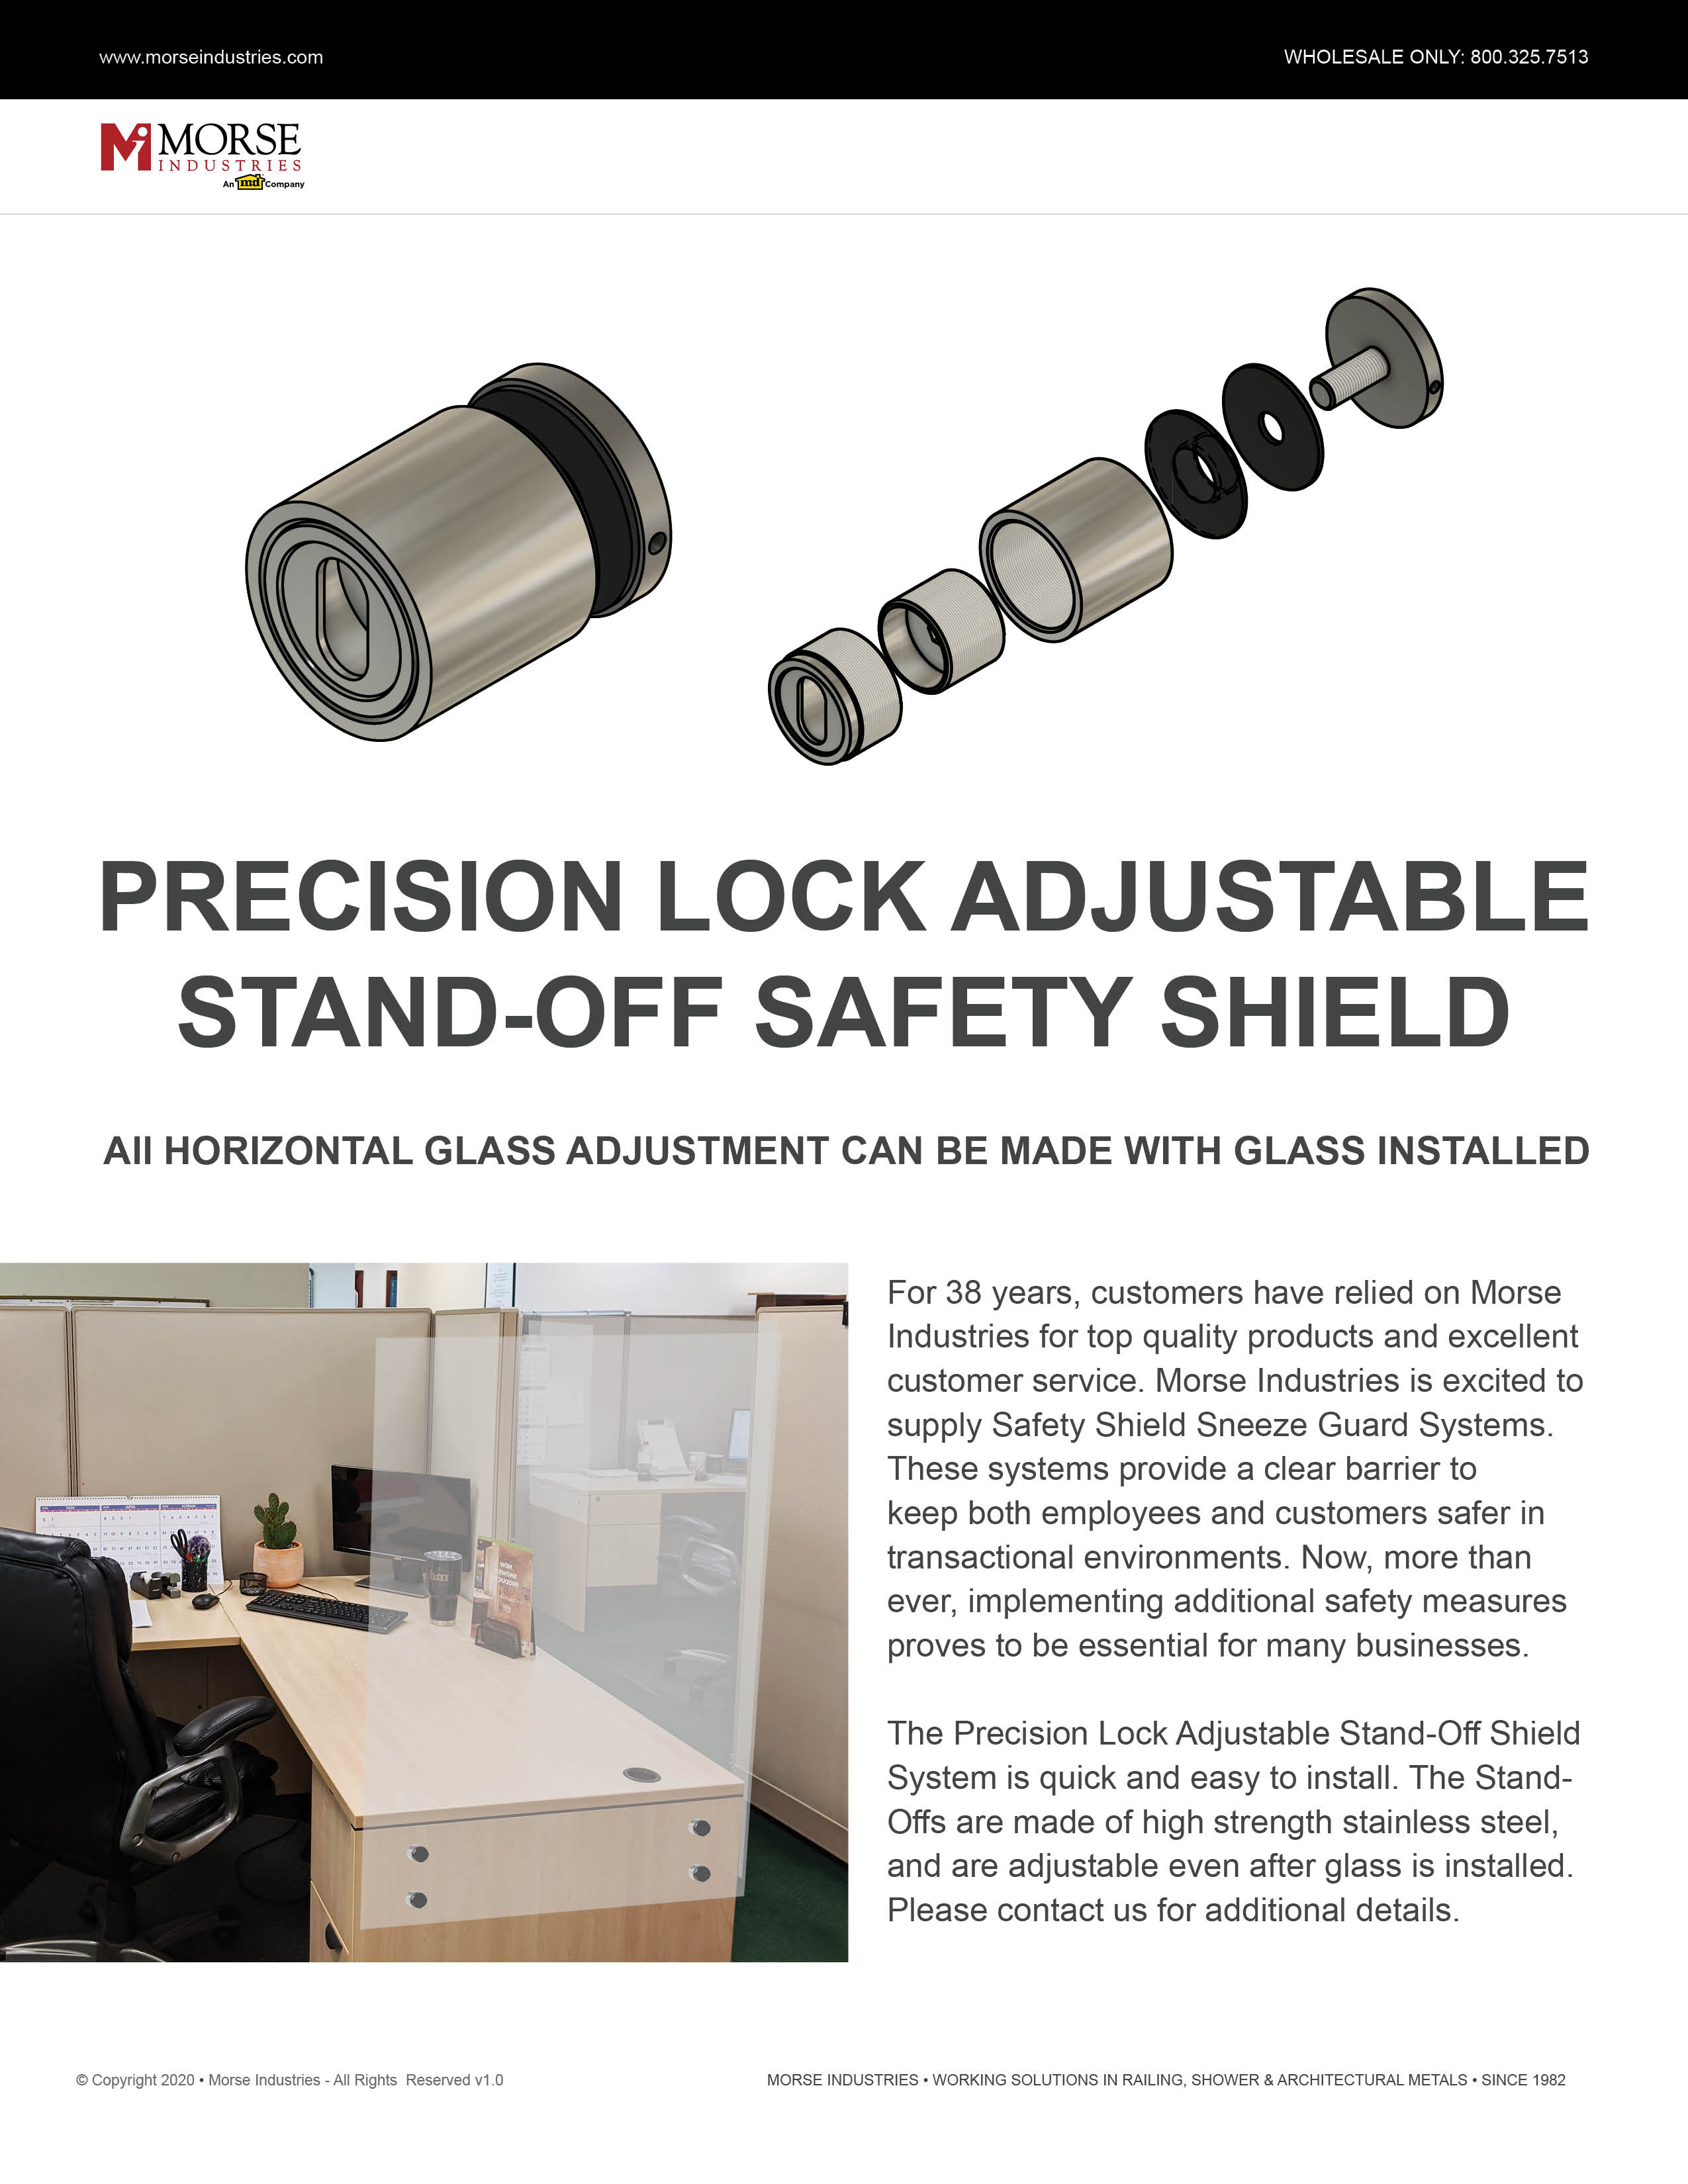 Adjustable Stand-Off Safety Shield